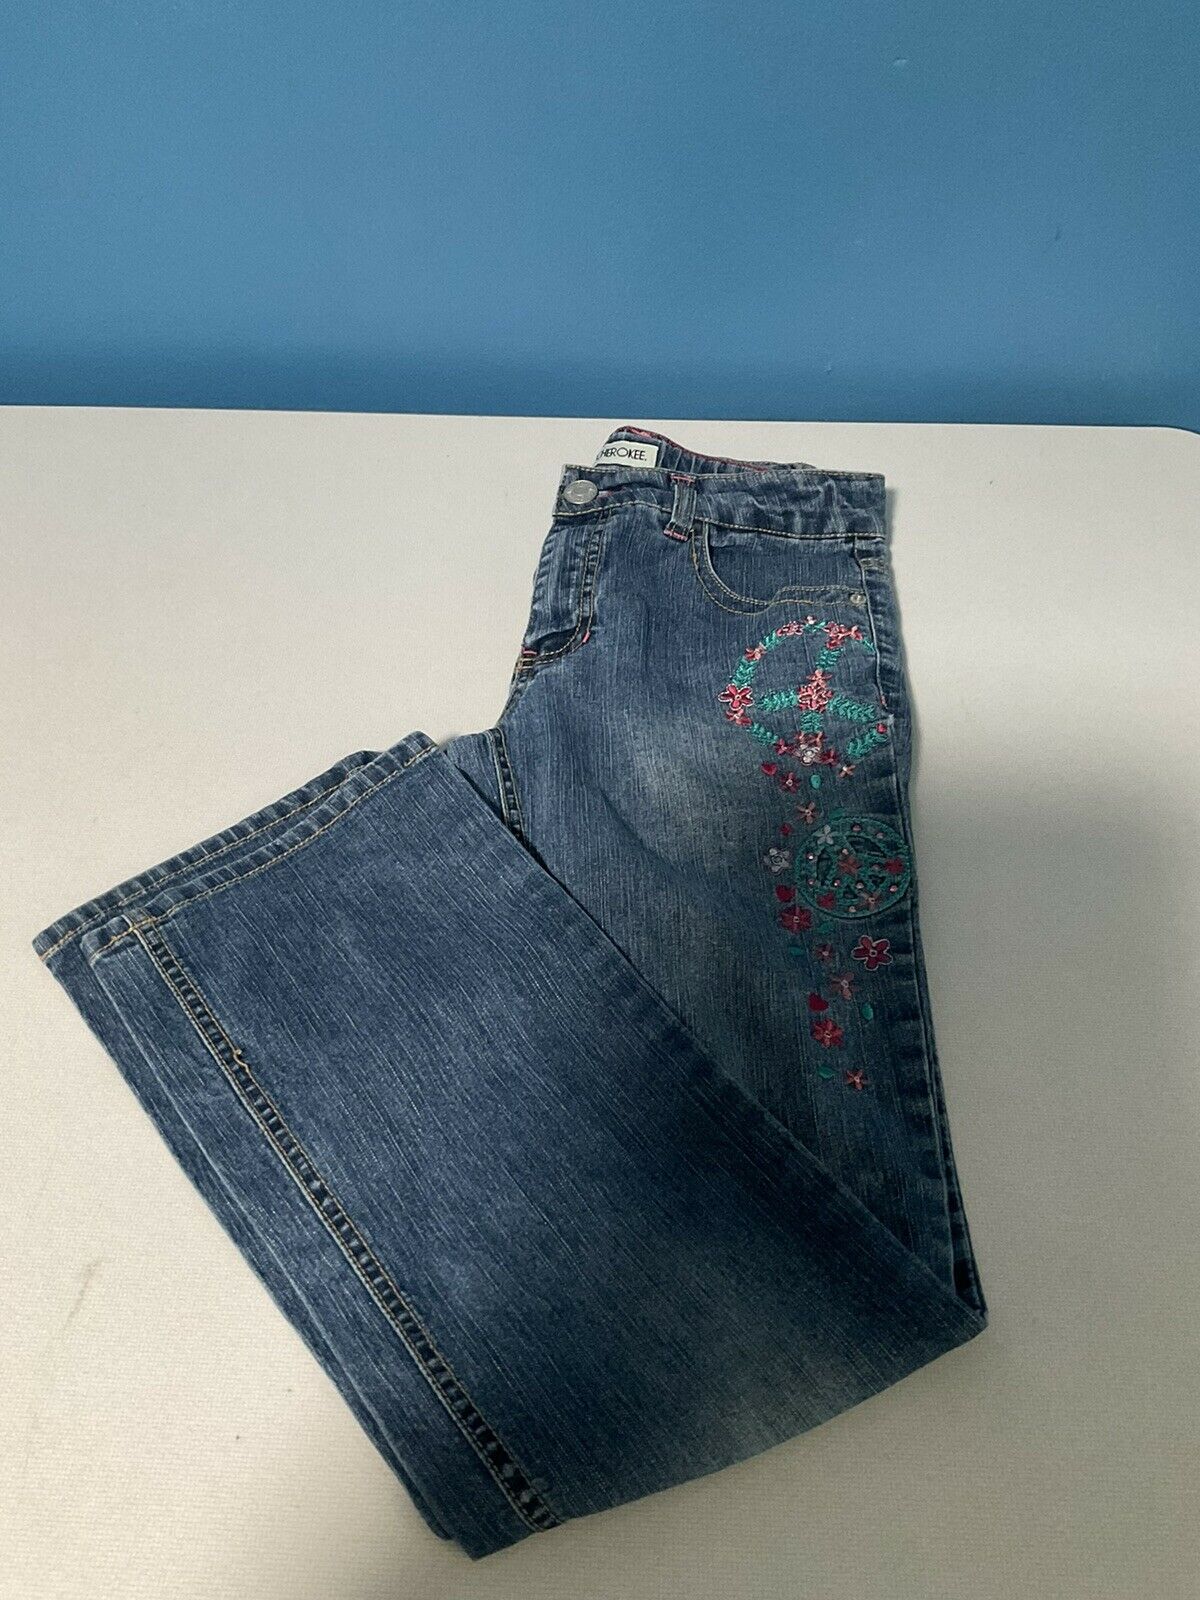 Cherokee Girls Denim Bluejeans Size 14 Embroidered Peace Symbol